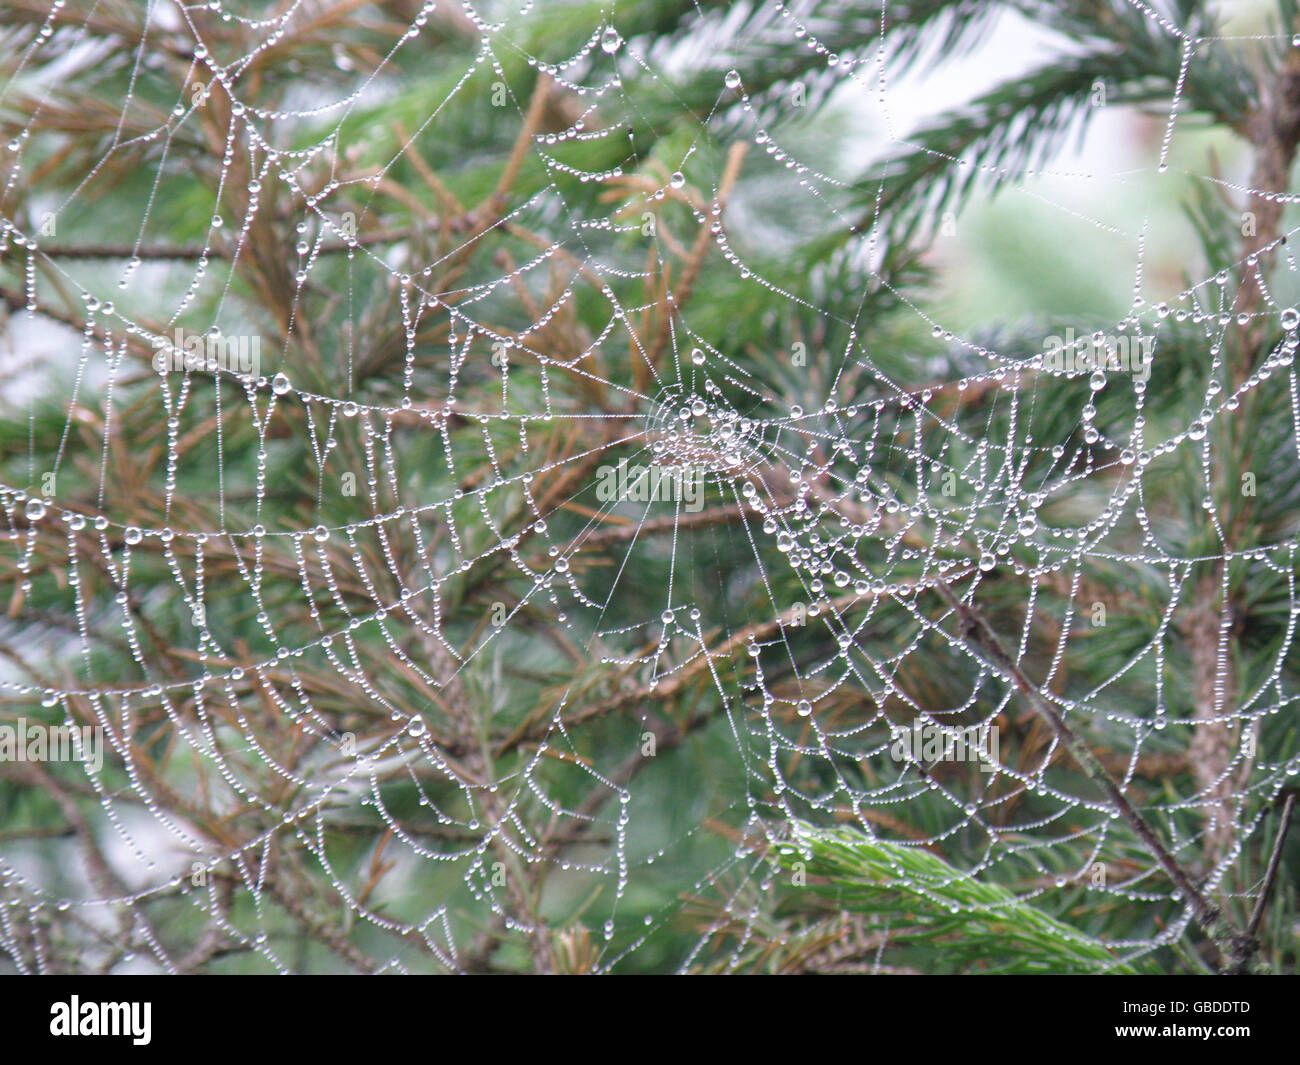 Drops of water caught in a dewy spider web found in nature. Stock Photo